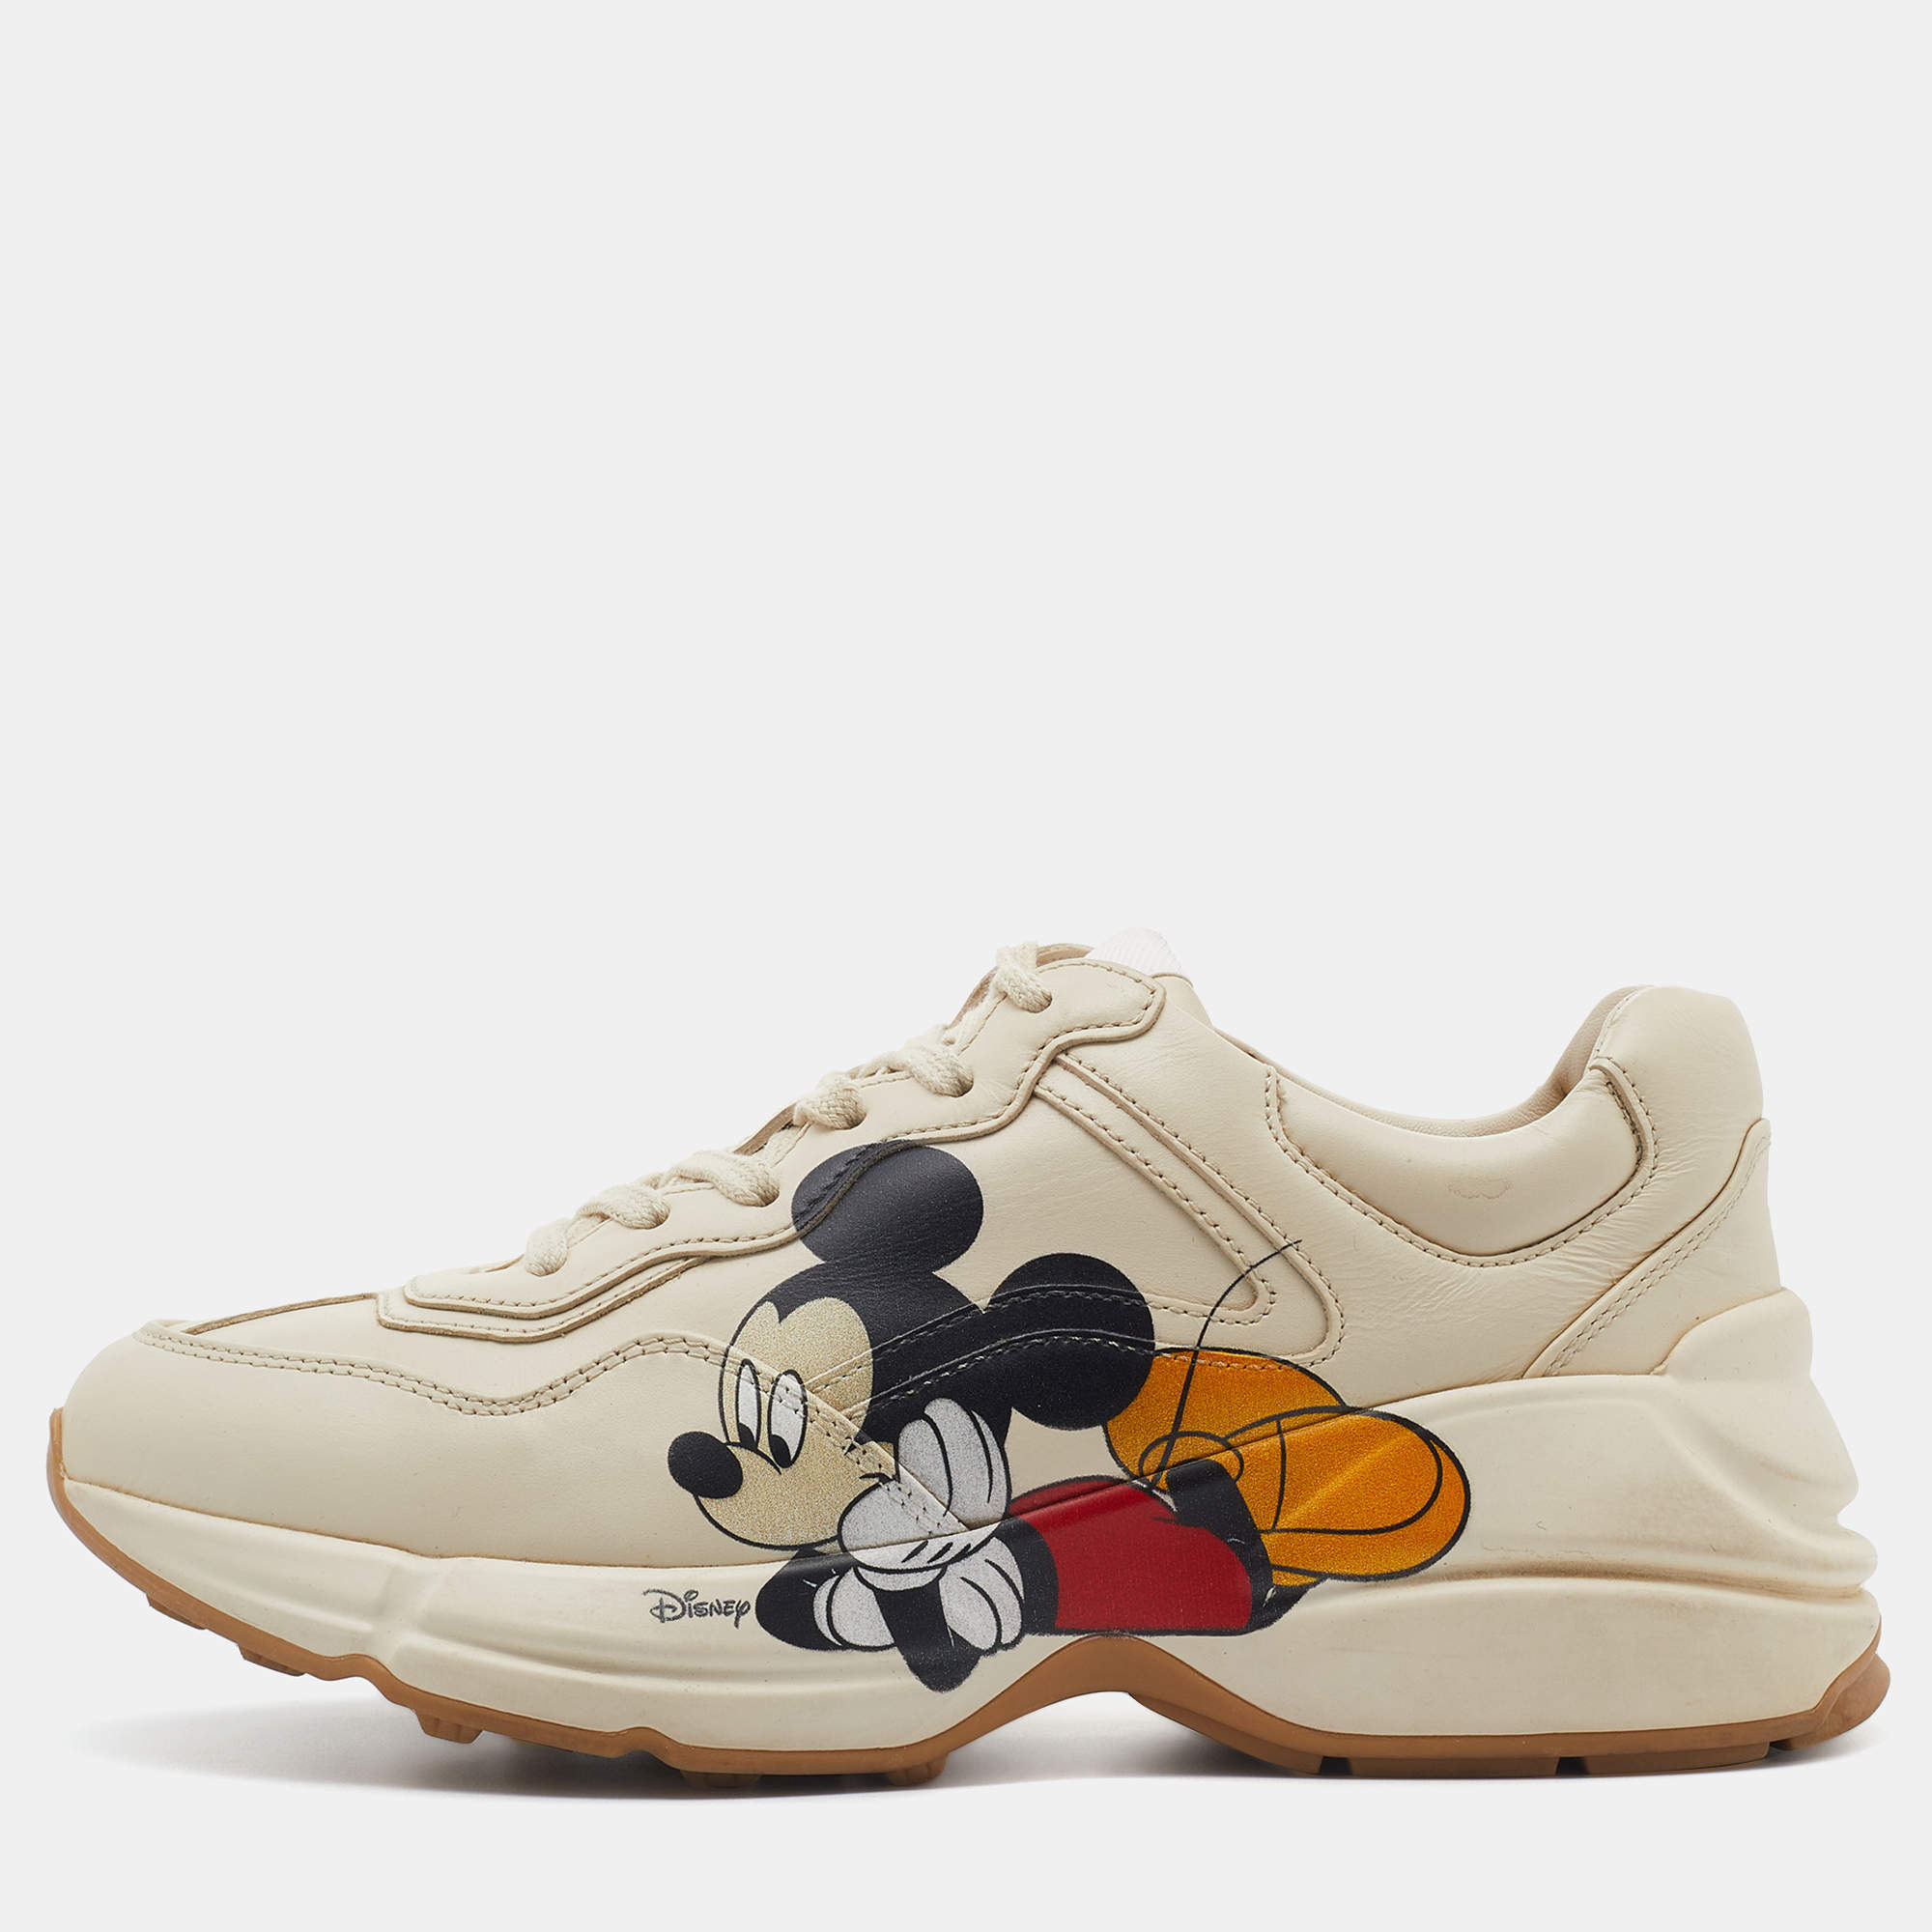 Gucci Off White Leather Rhyton Mickey Mouse Sneakers Size 36.5 Gucci ...